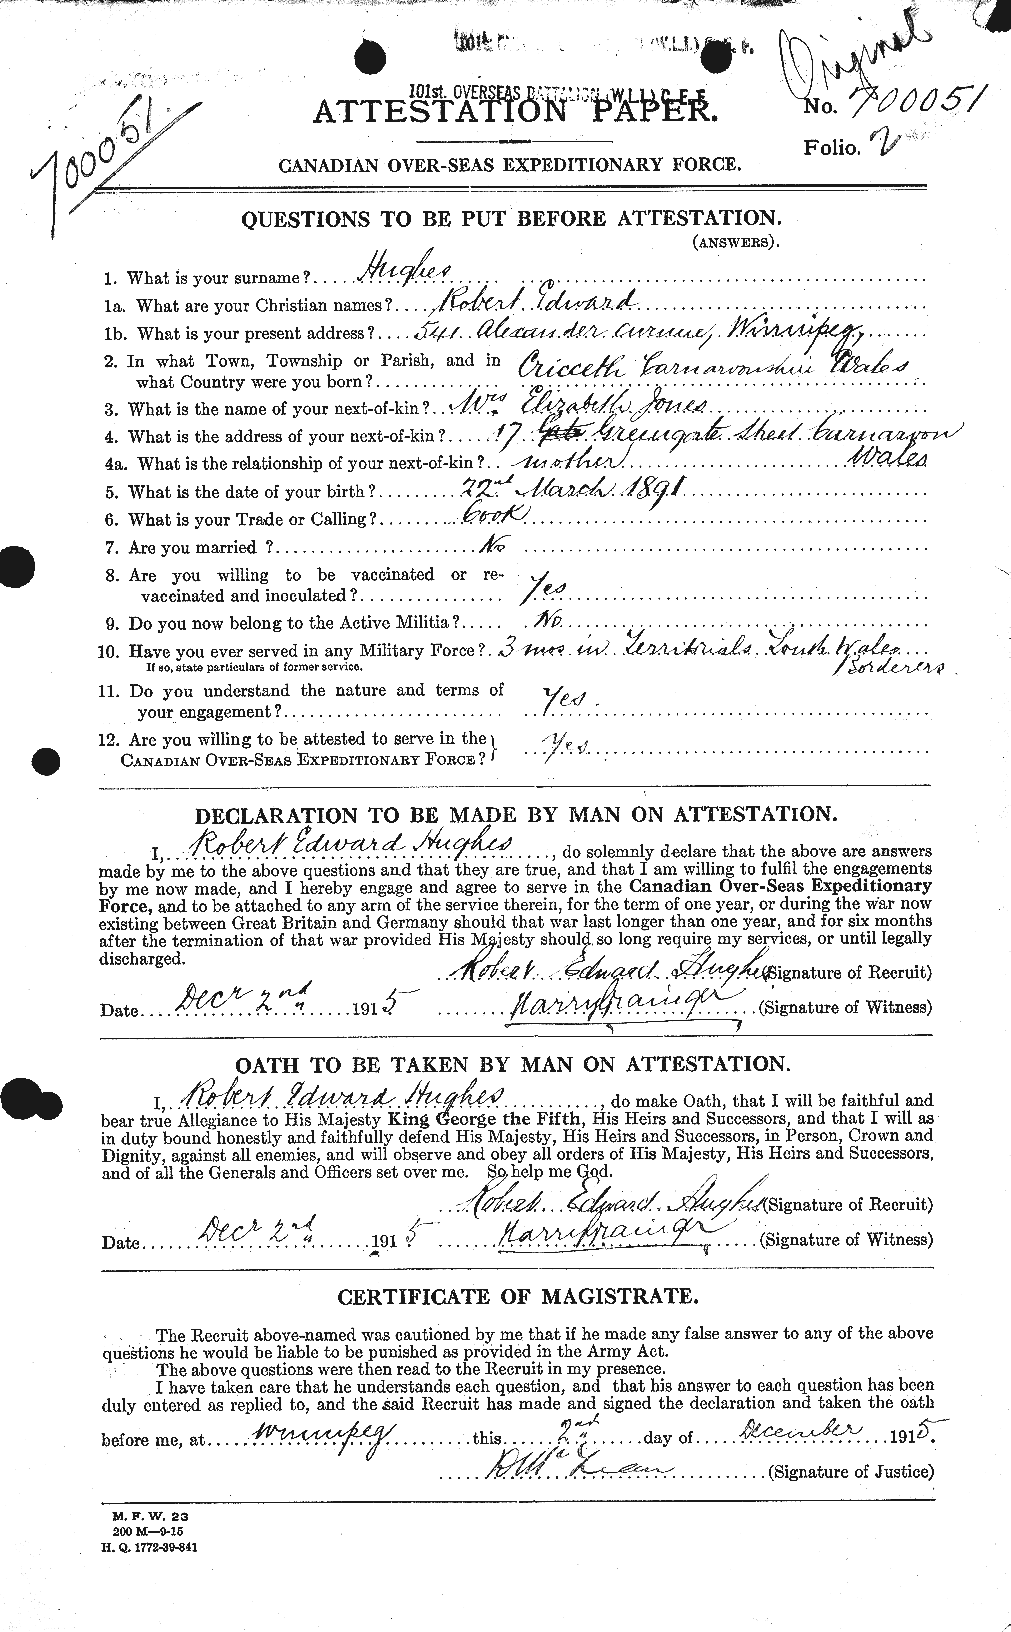 Personnel Records of the First World War - CEF 406610a